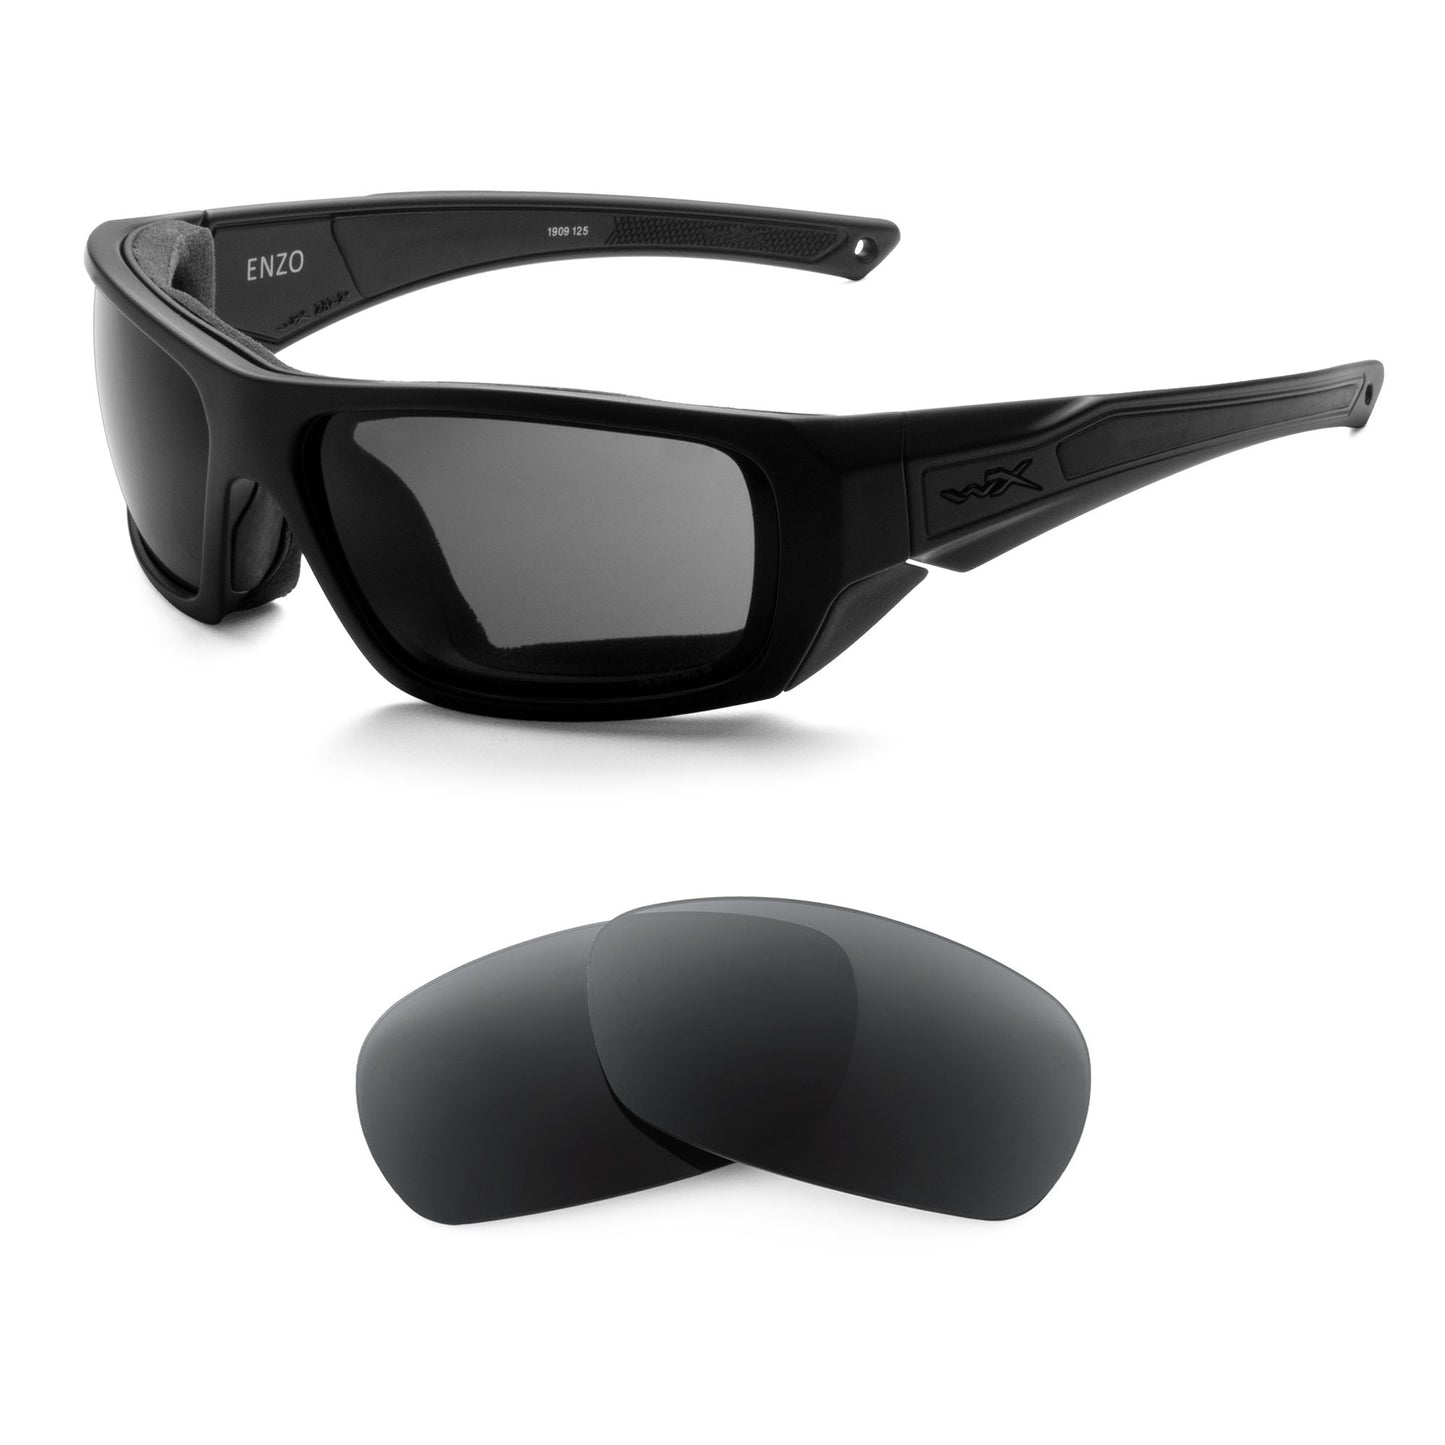 Wiley X Enzo sunglasses with replacement lenses